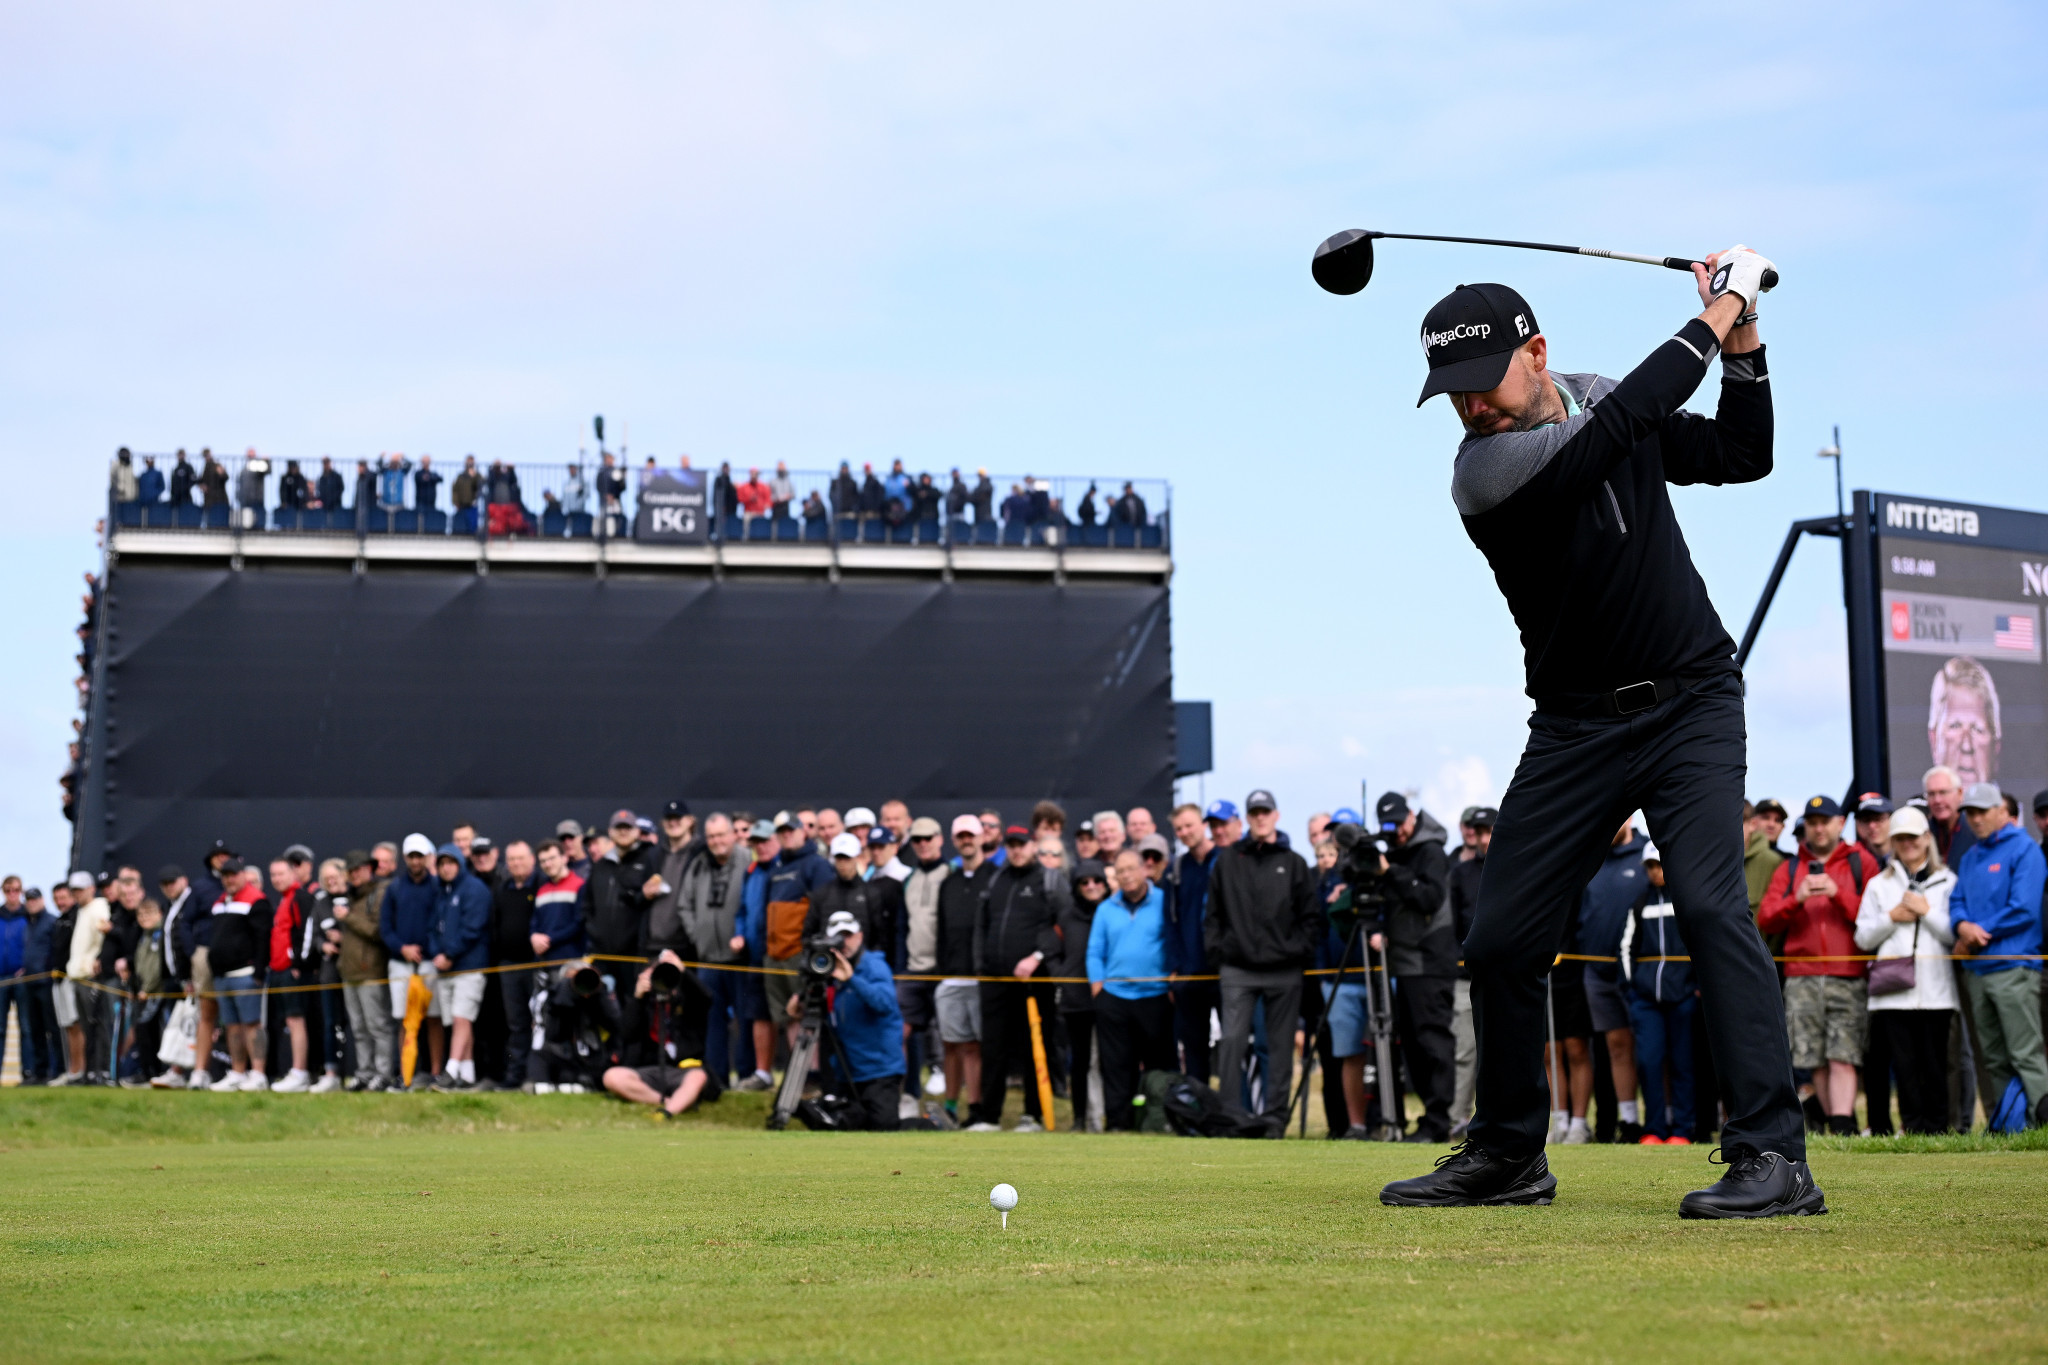 Harman takes five-shot lead at halfway point of The Open Championship